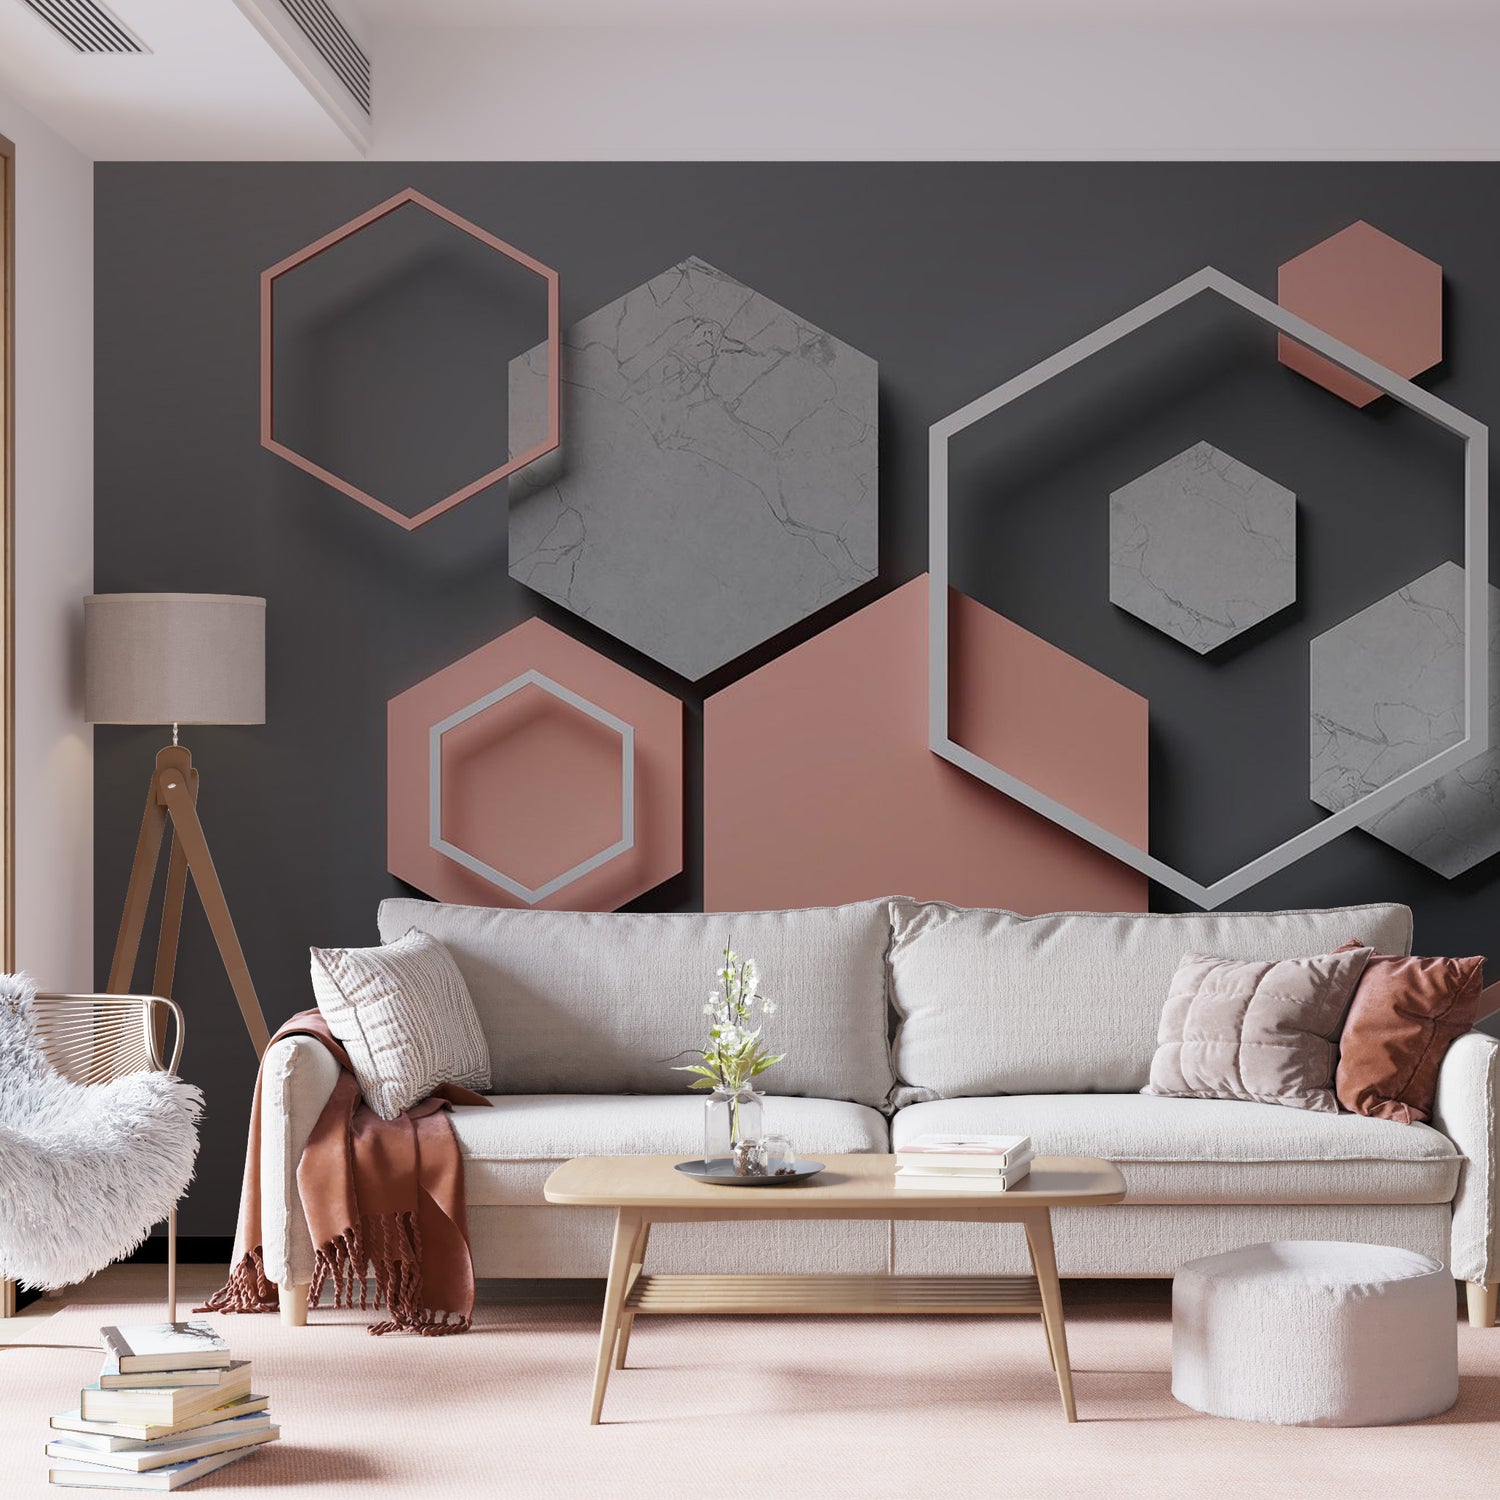 Peel & Stick 3D Illusion Wall Mural - Abstract Hexagon Plan - Removable Wall Decals